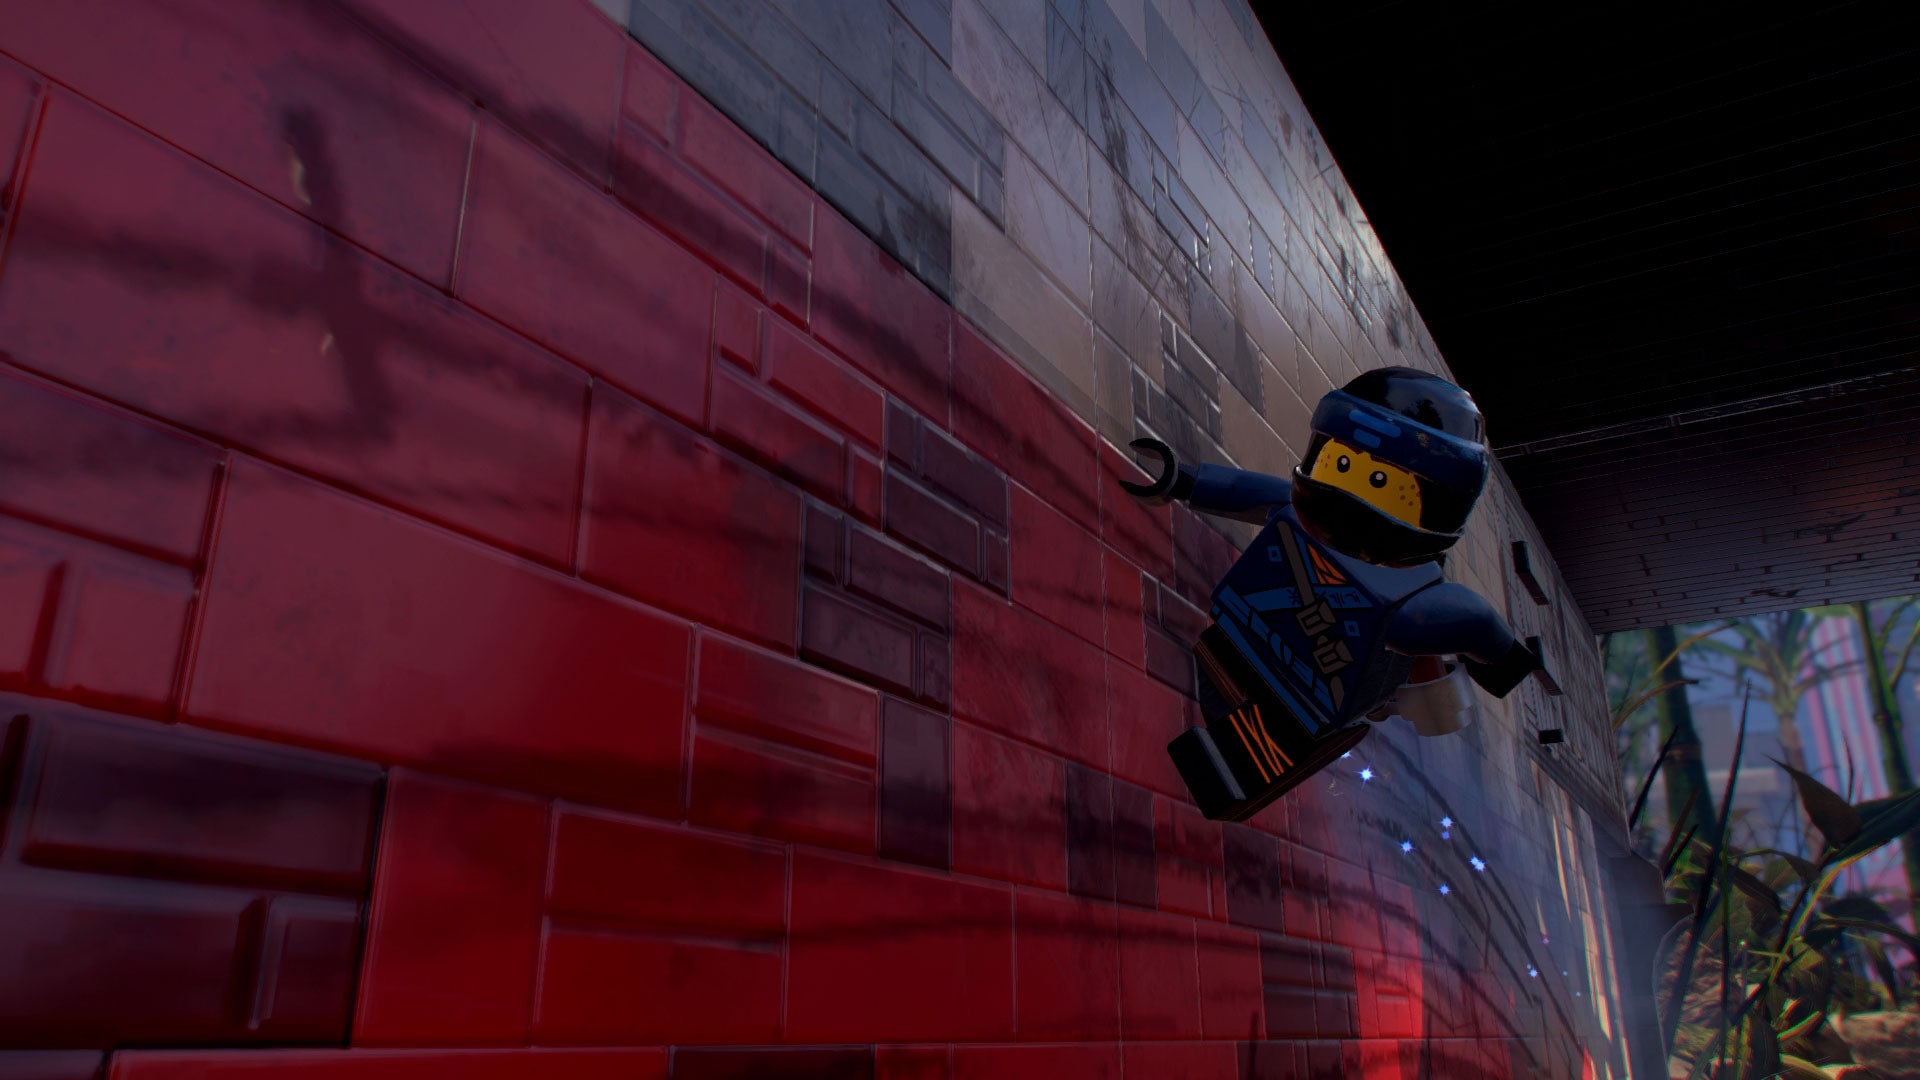 Download the full LEGO Ninjago Game for FREE on Playstation 4, Xbox One and  PC available till May 21